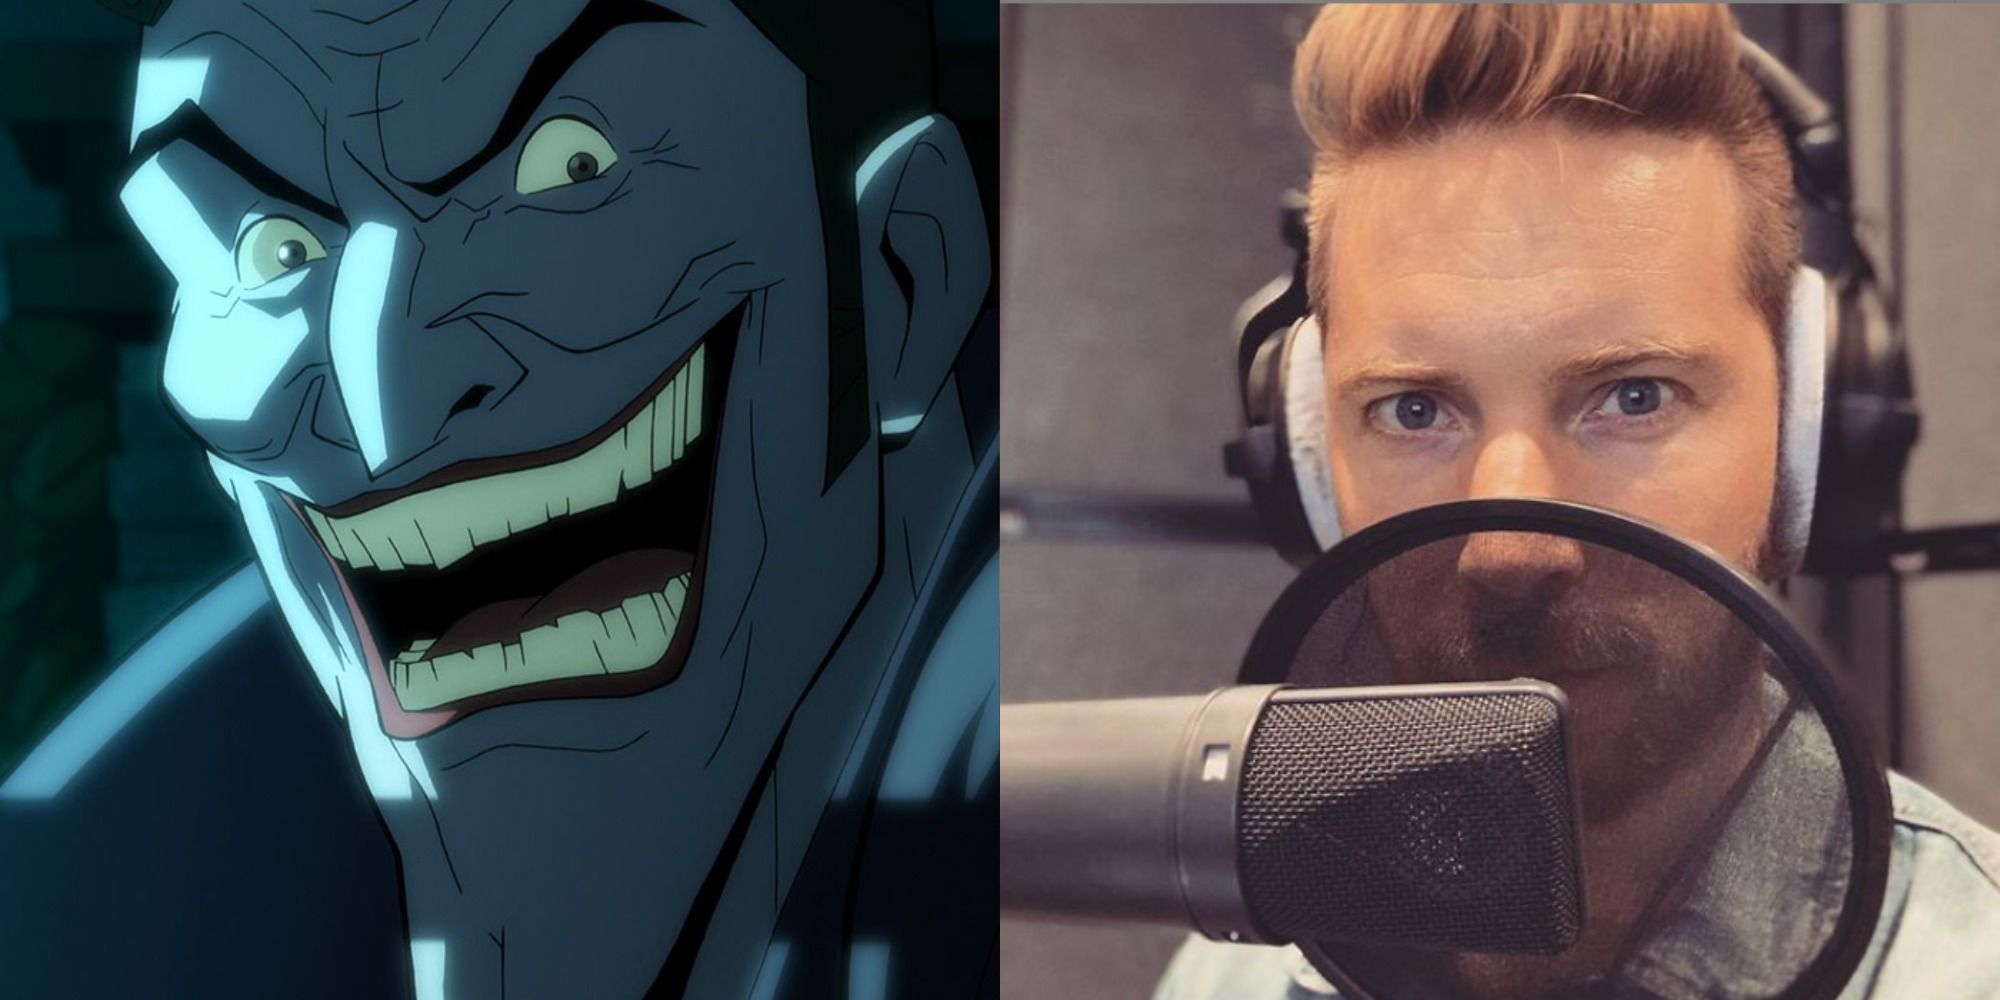 A split image of the Joker in The Long Halloween and Troy Baker recording in a booth